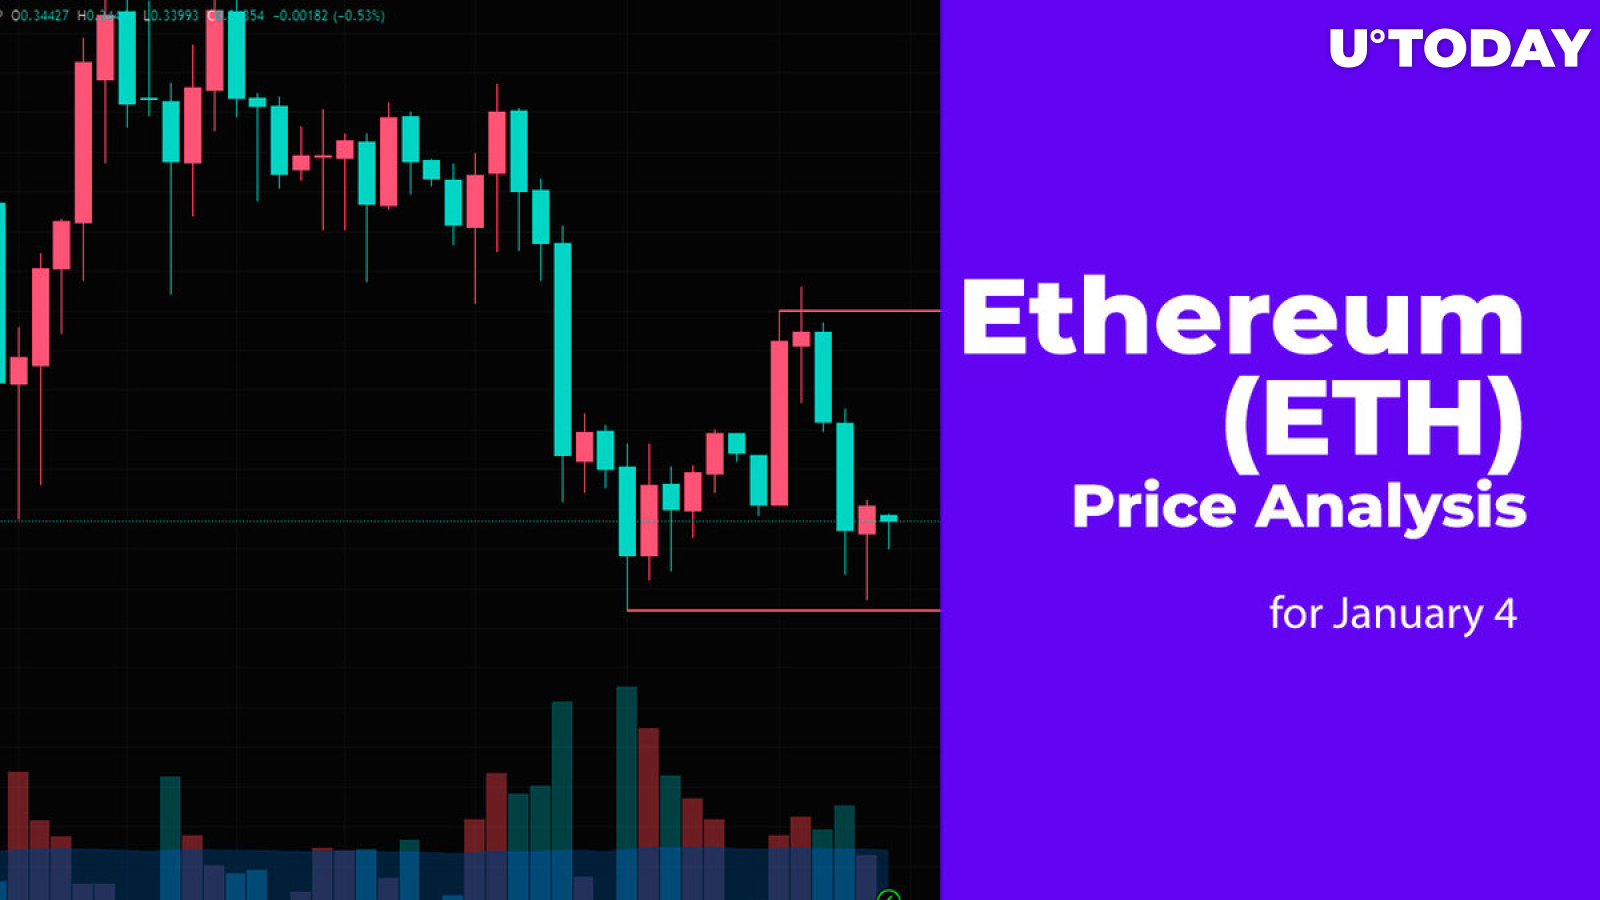 Ethereum (ETH) Price Analysis for January 4